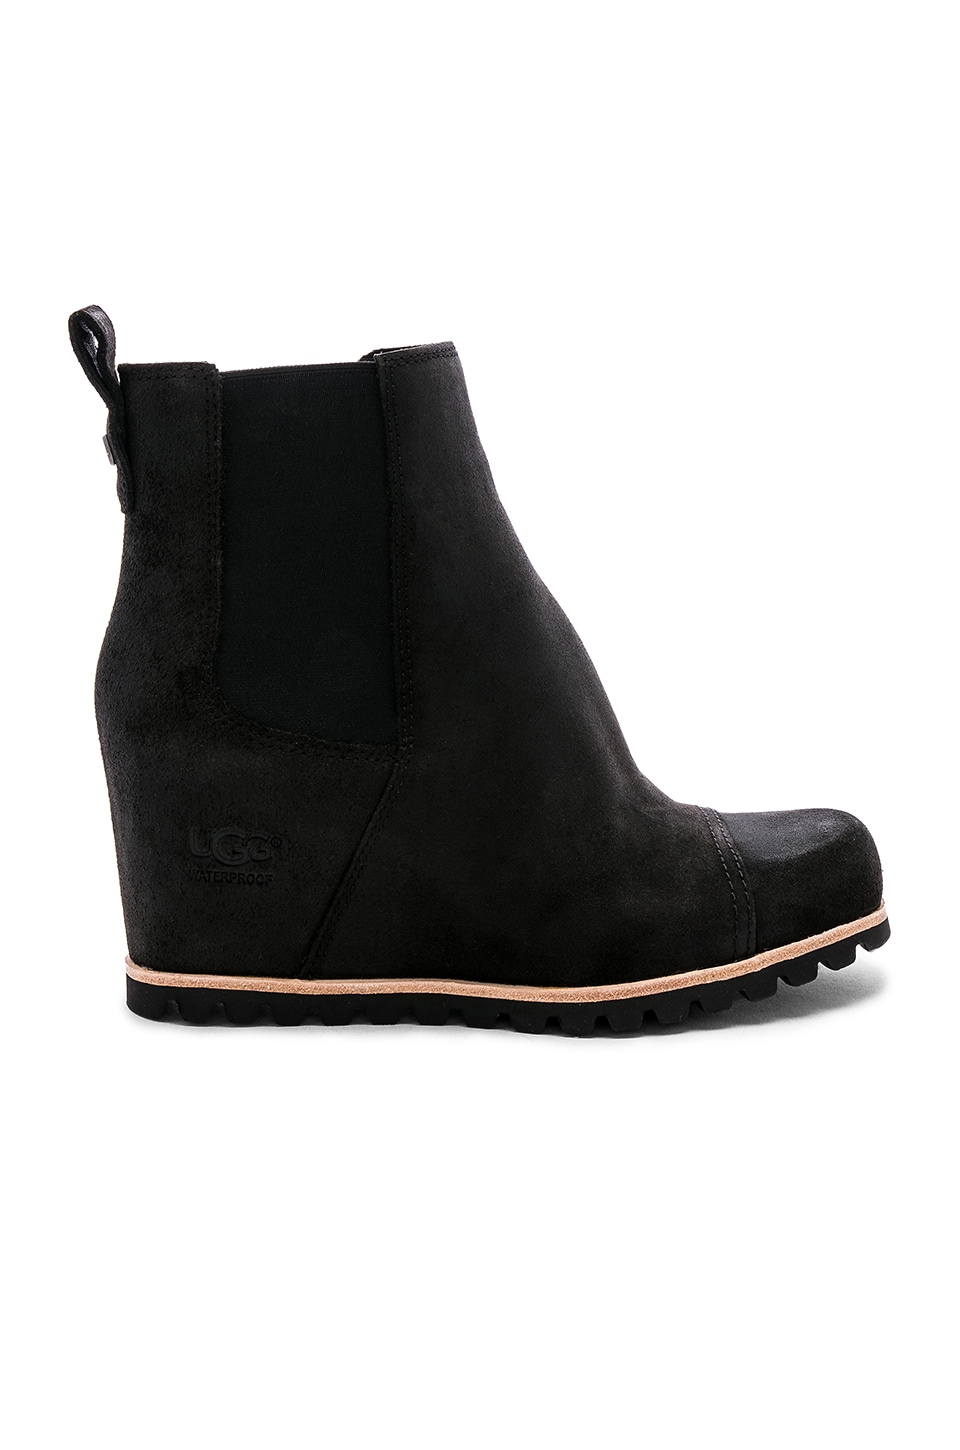 ugg wedge boot pax